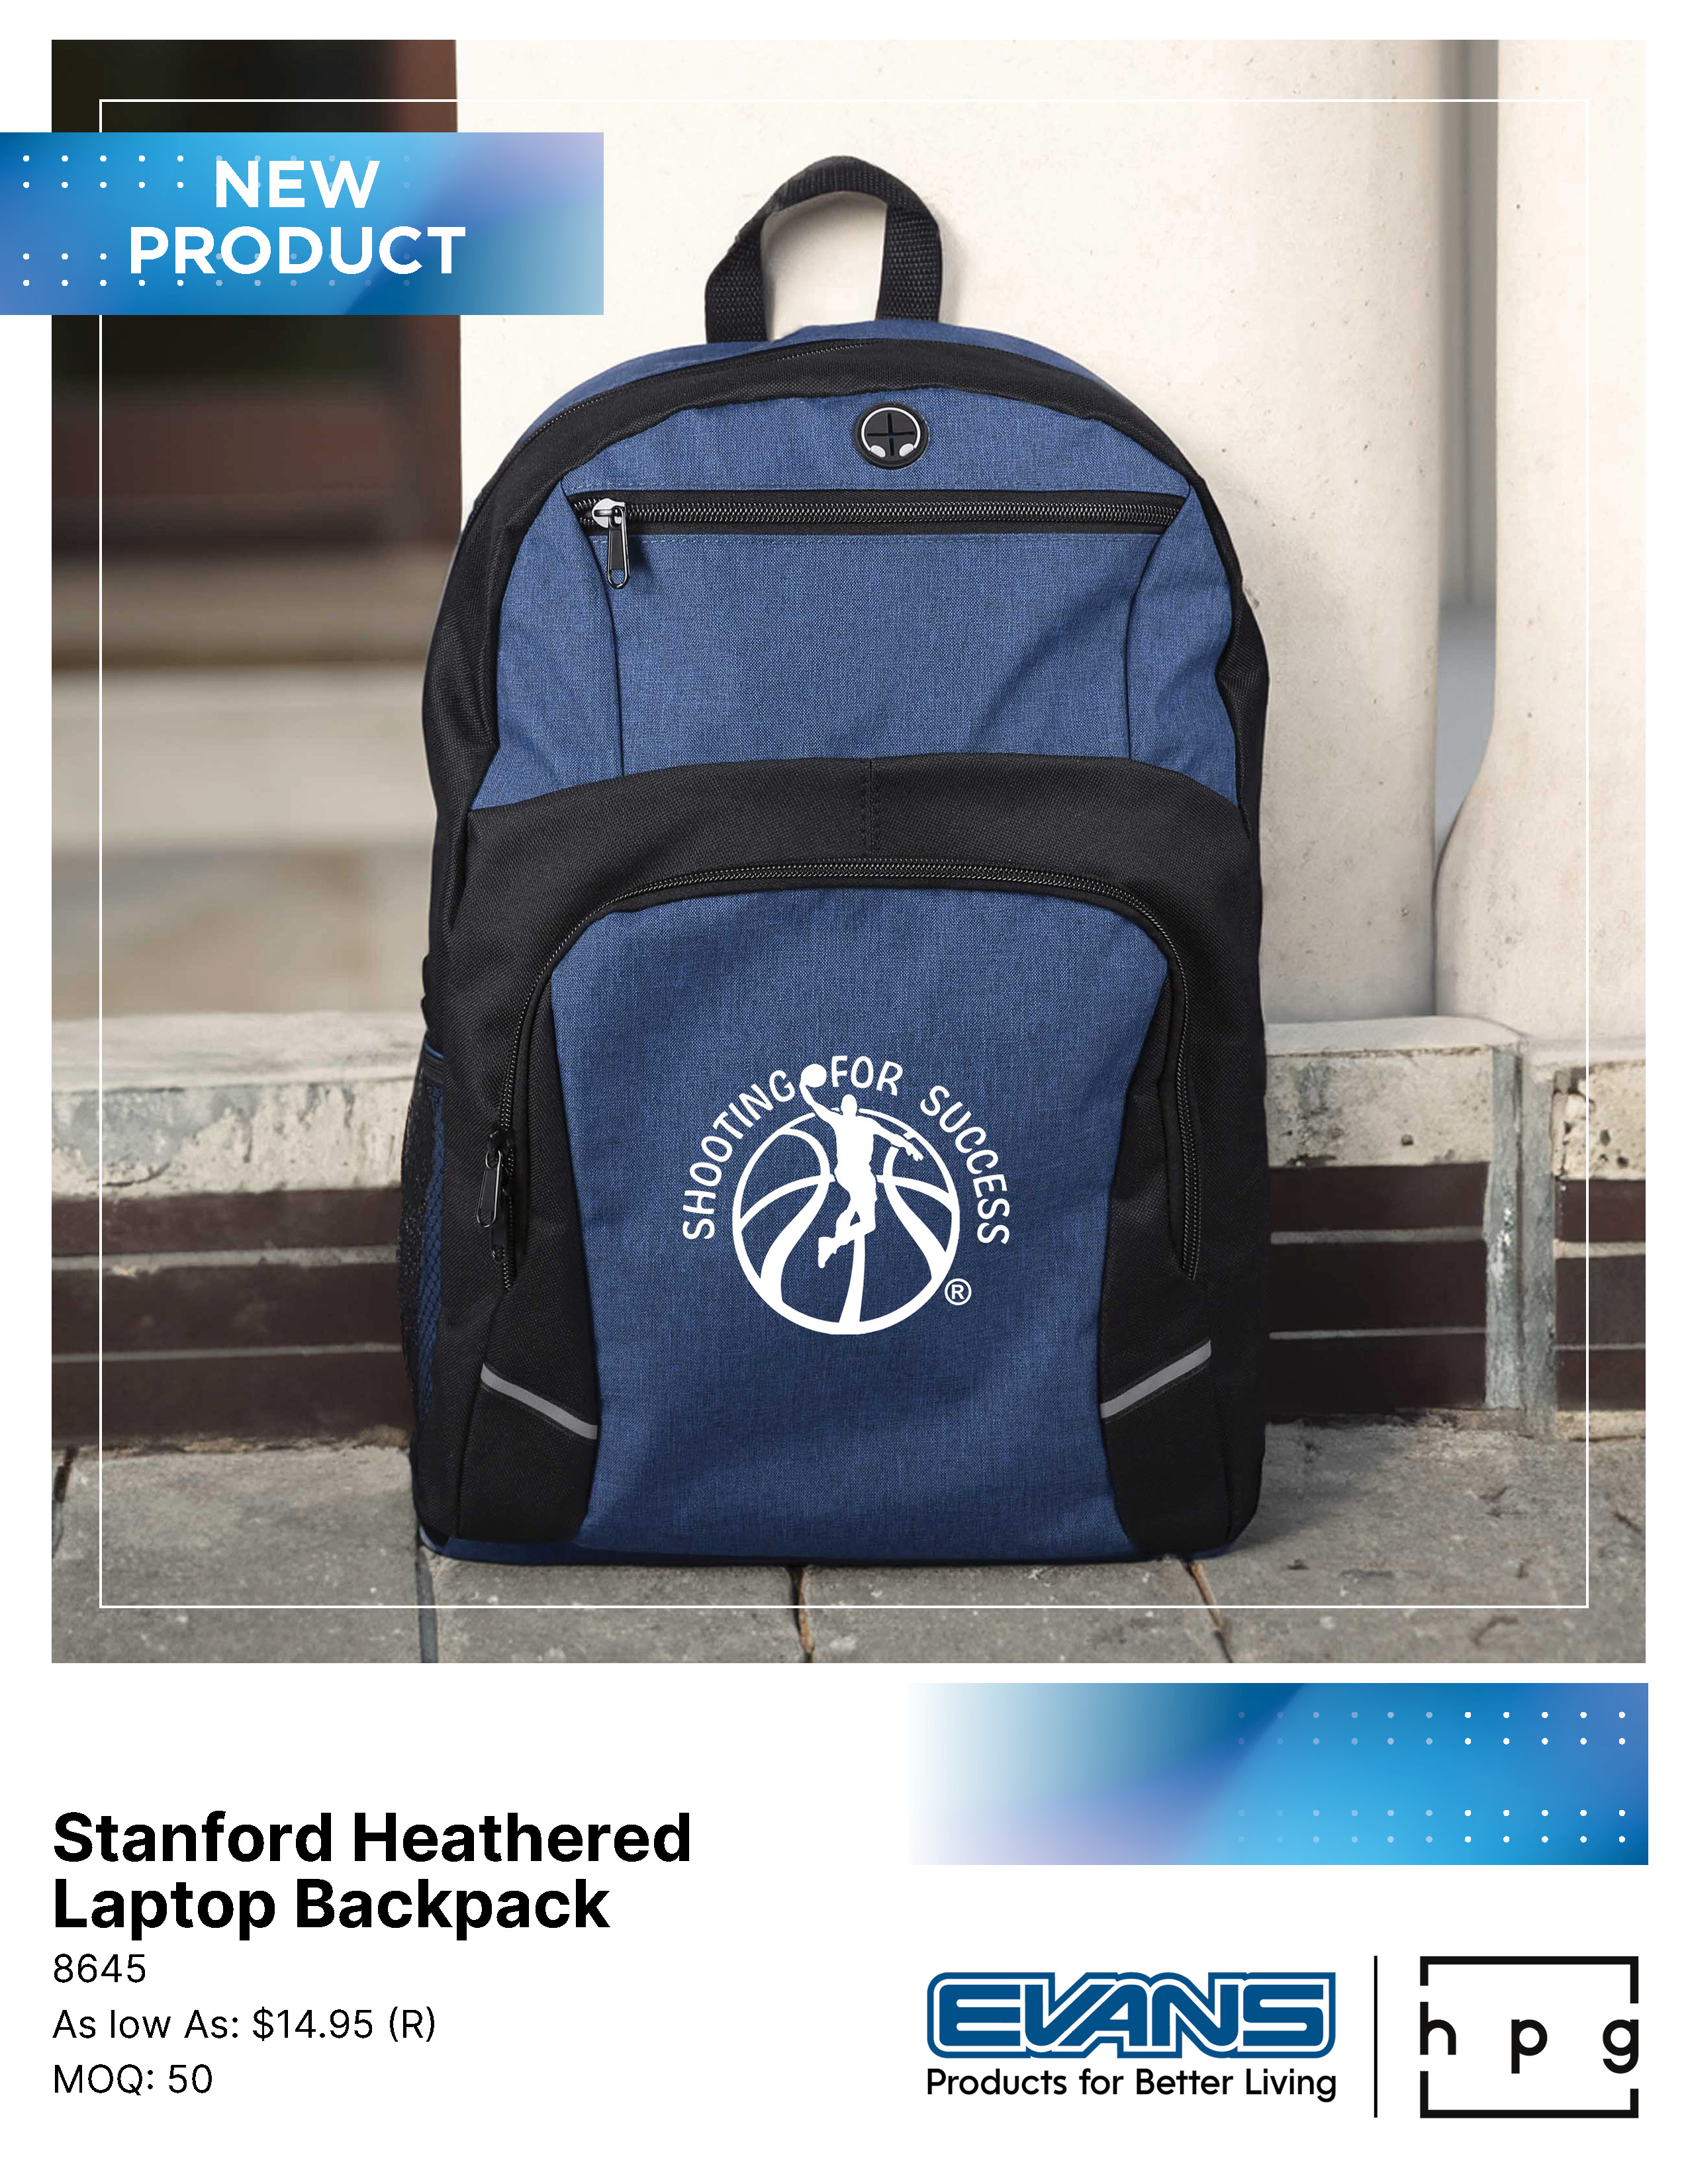 8645 - Standford Heathered 16" Laptop Backpack